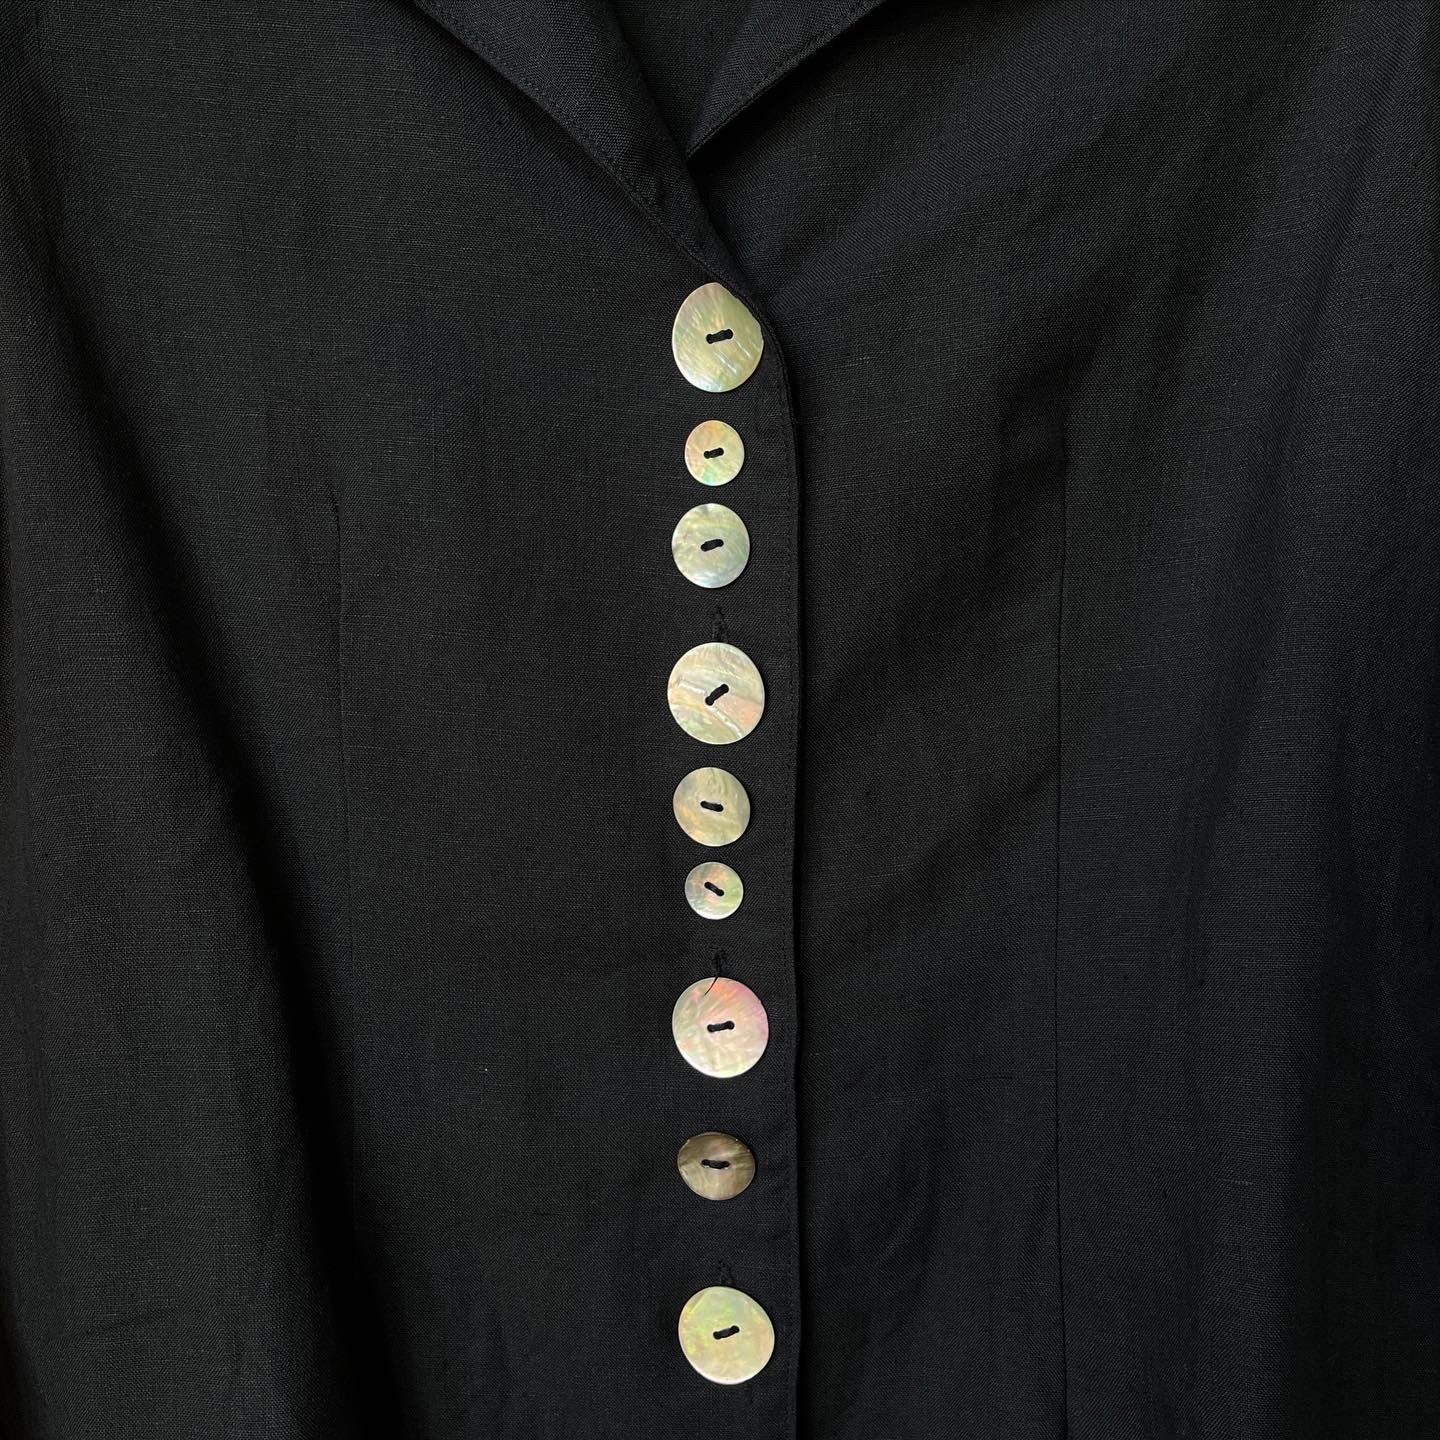 Vintage linen blouse with shell buttons (Sold)